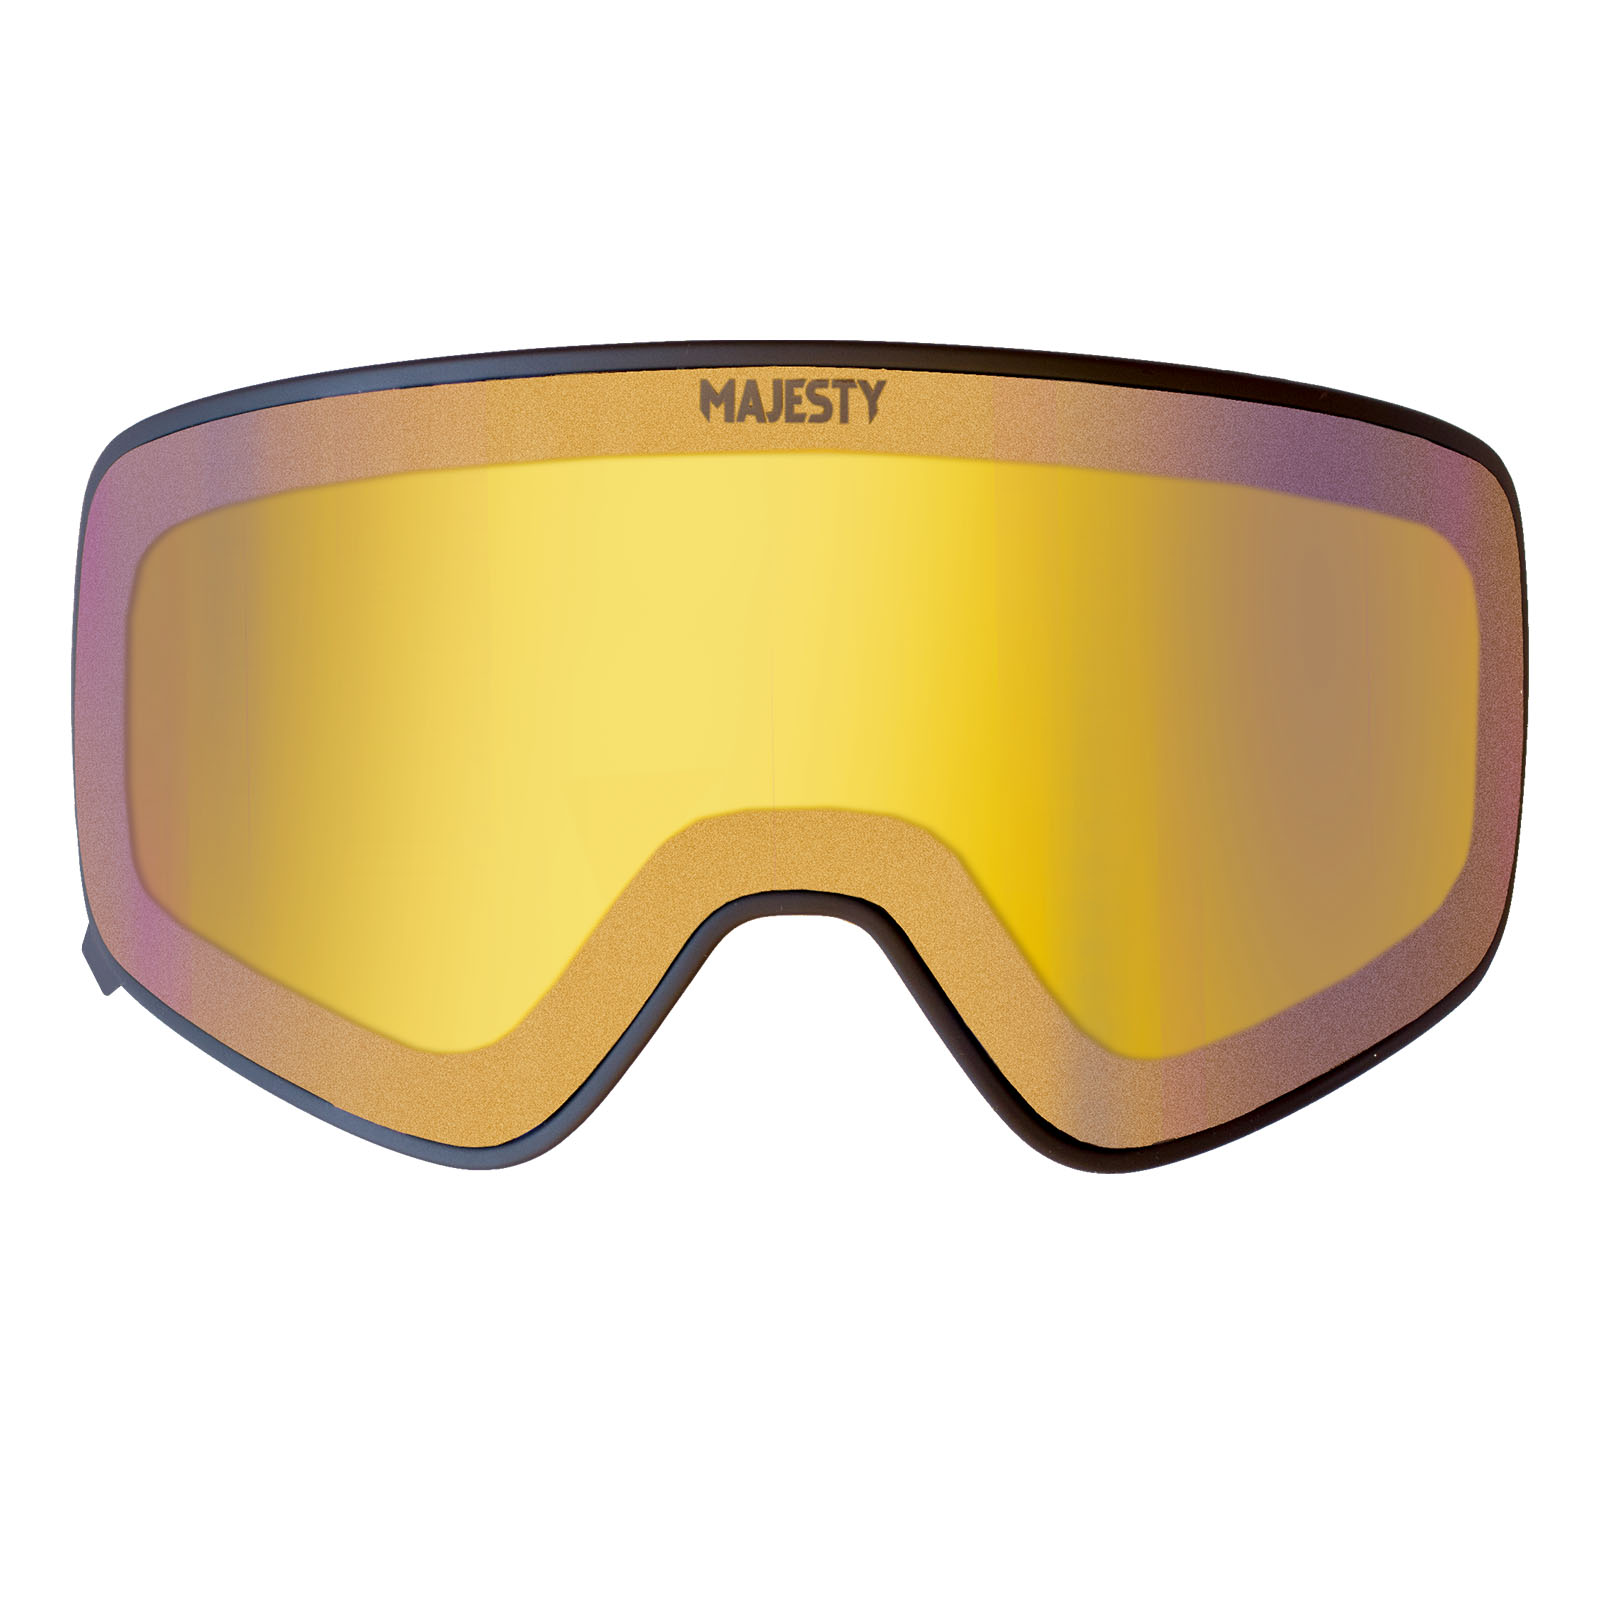 MAJESTY The Force C Magnetic Ski Goggles black frame / black pearl lens +  XENON HD Moonstone - MAJESTY SKIS - Skis Online - Official MAJESTY Store